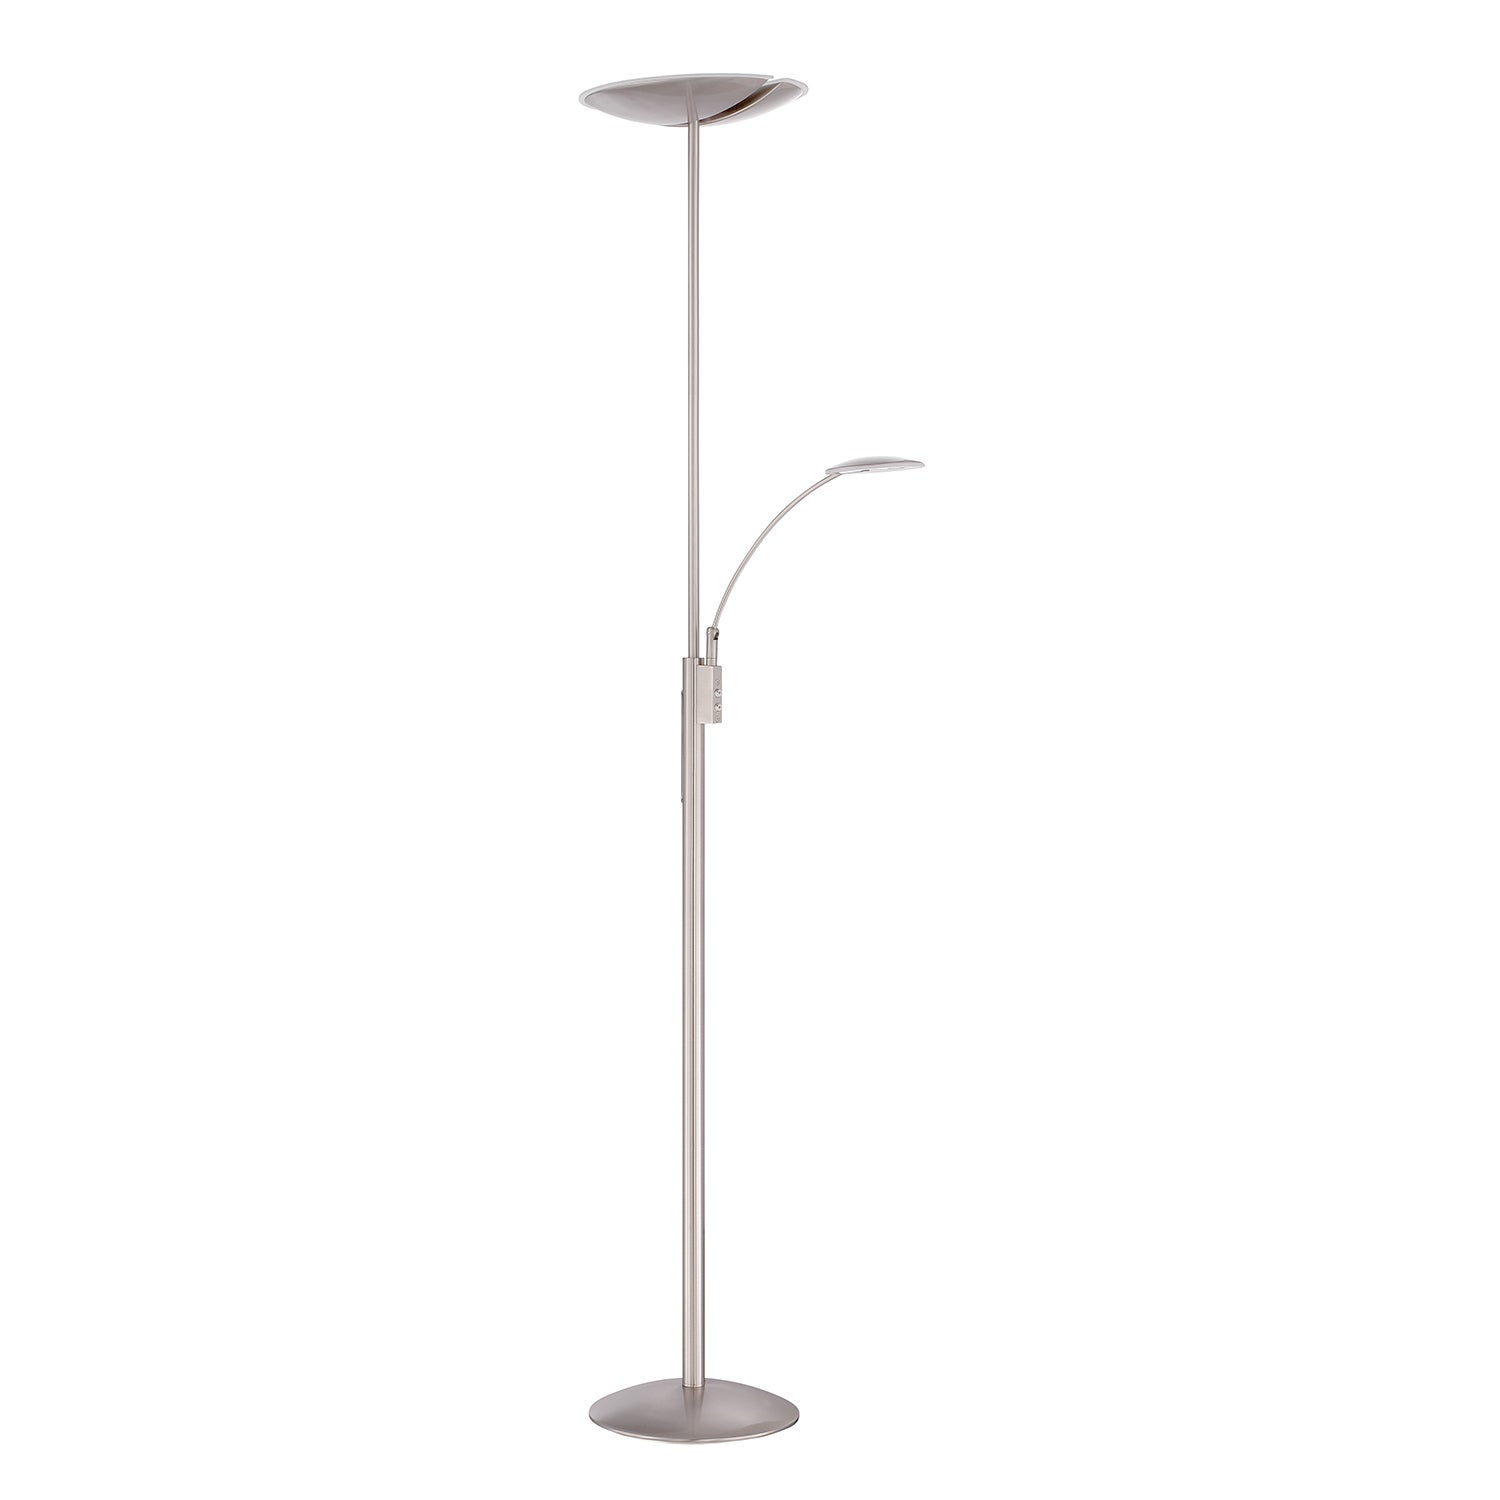 Splitz Series Satin Nickel 72 Inch Led Torchiere Floor Lamp With Reading Light with regard to dimensions 1500 X 1500